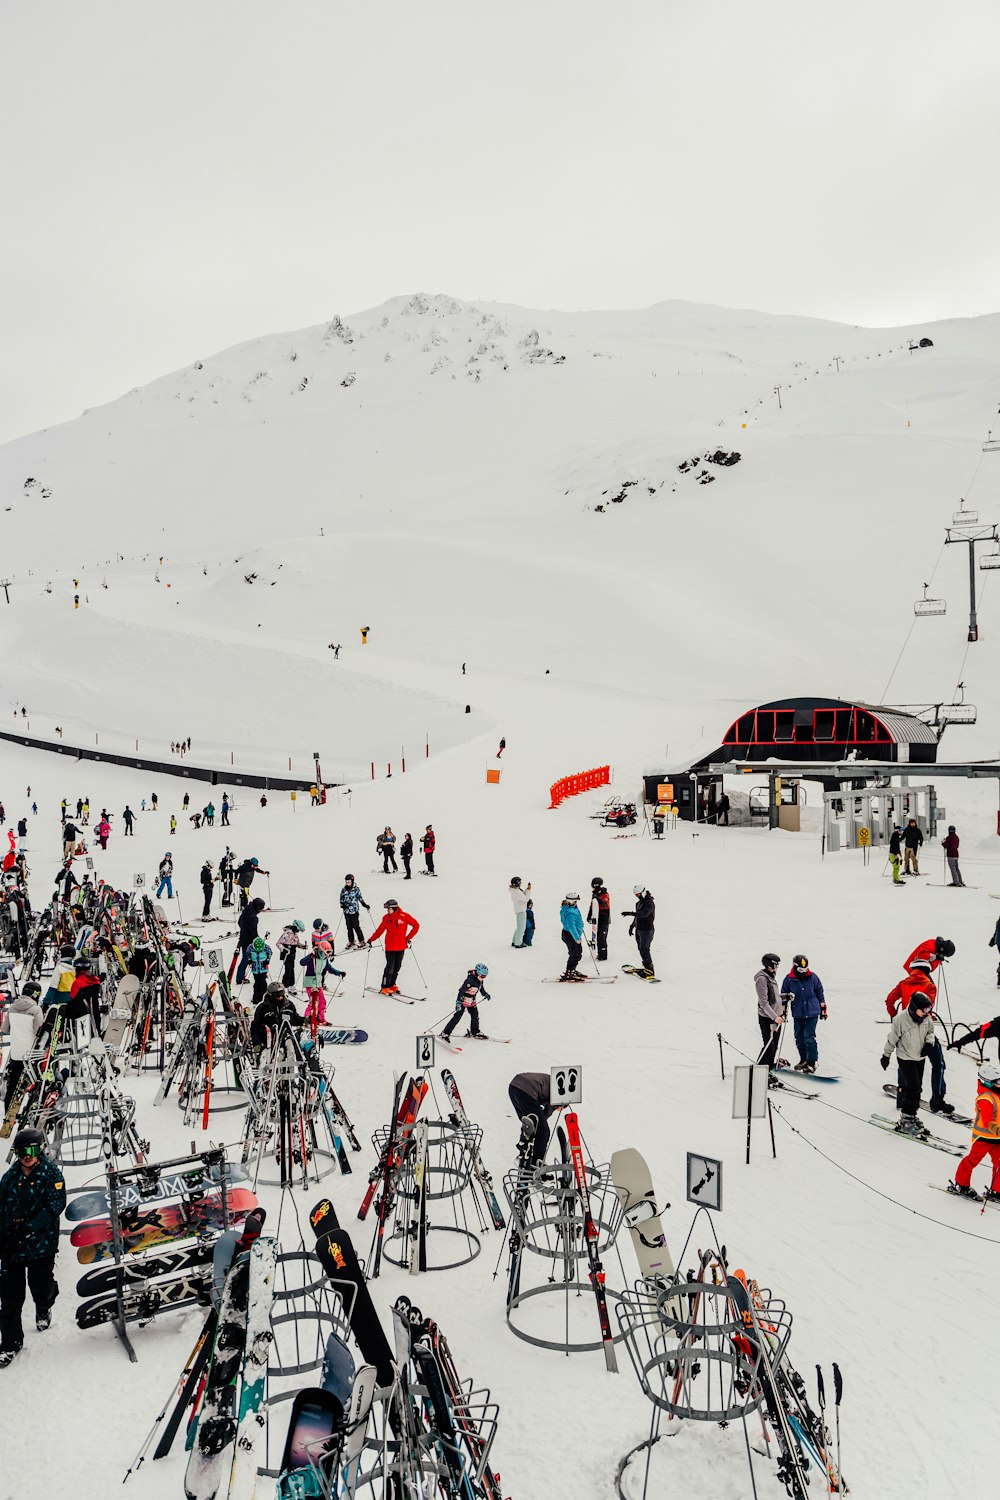 a large group of people standing on top of a snow covered slope